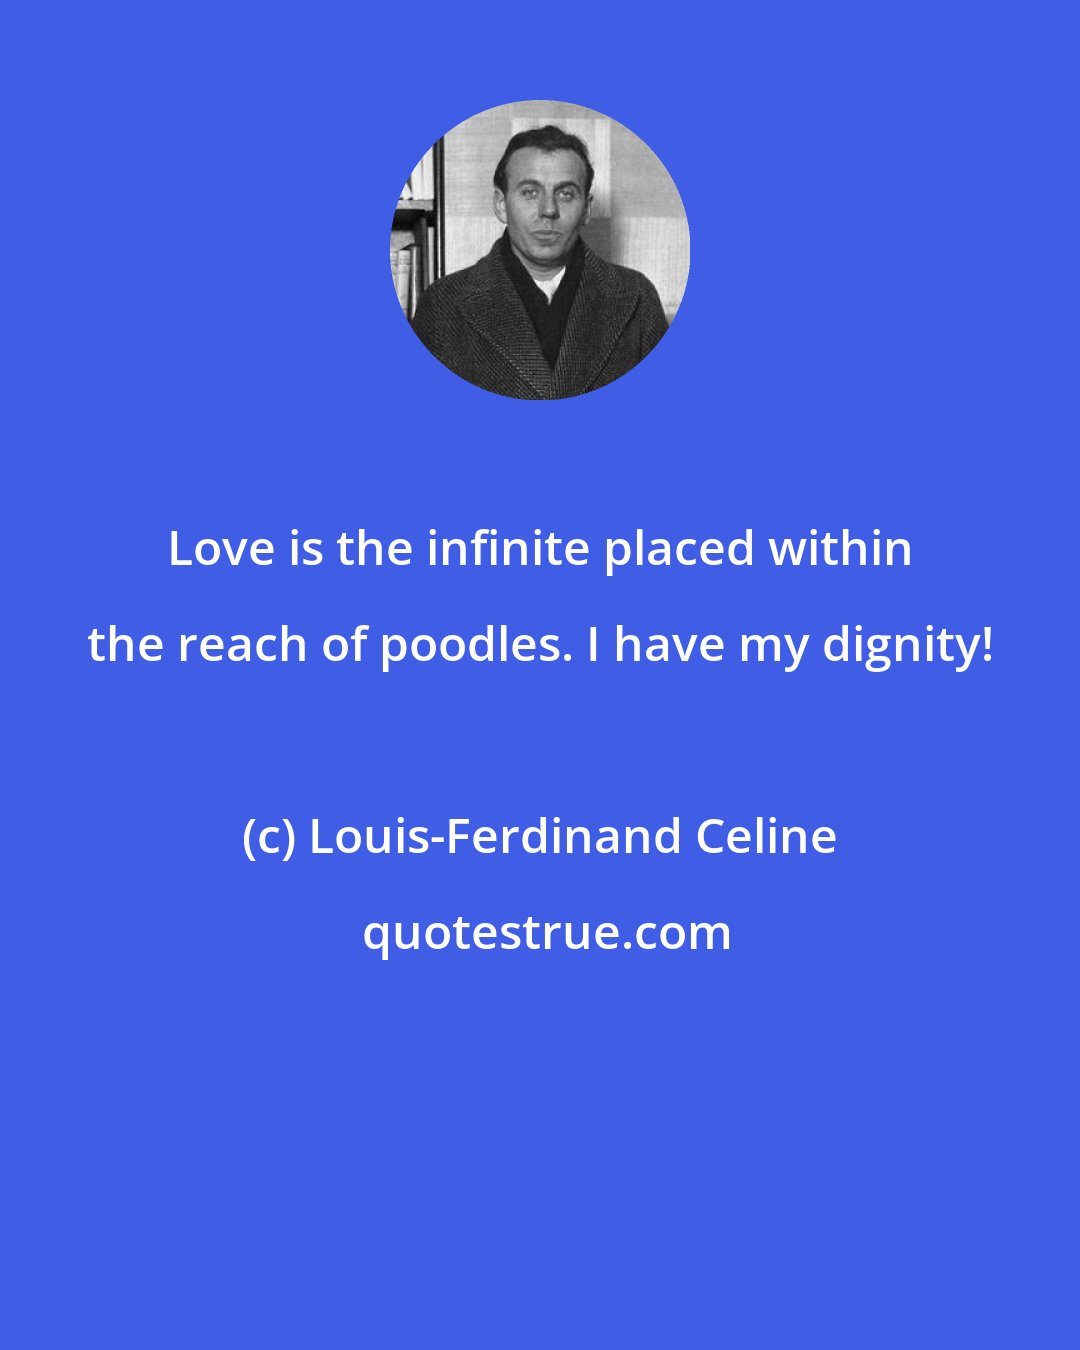 Louis-Ferdinand Celine: Love is the infinite placed within the reach of poodles. I have my dignity!